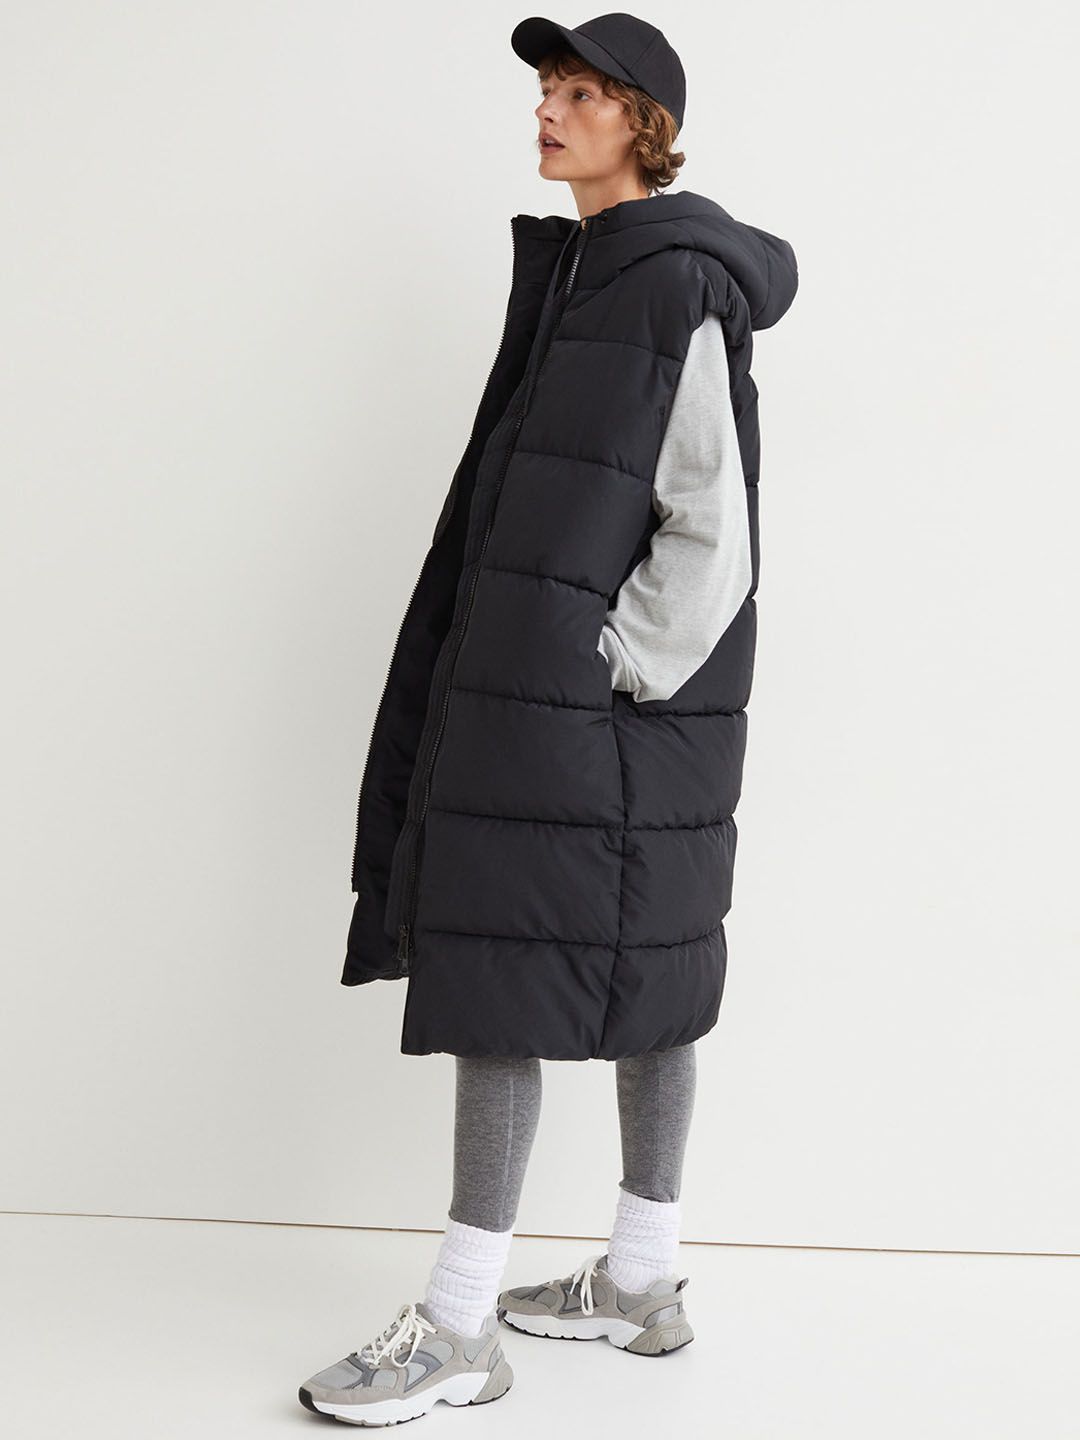 H&M Women Black Hooded Puffer Jacket Price in India